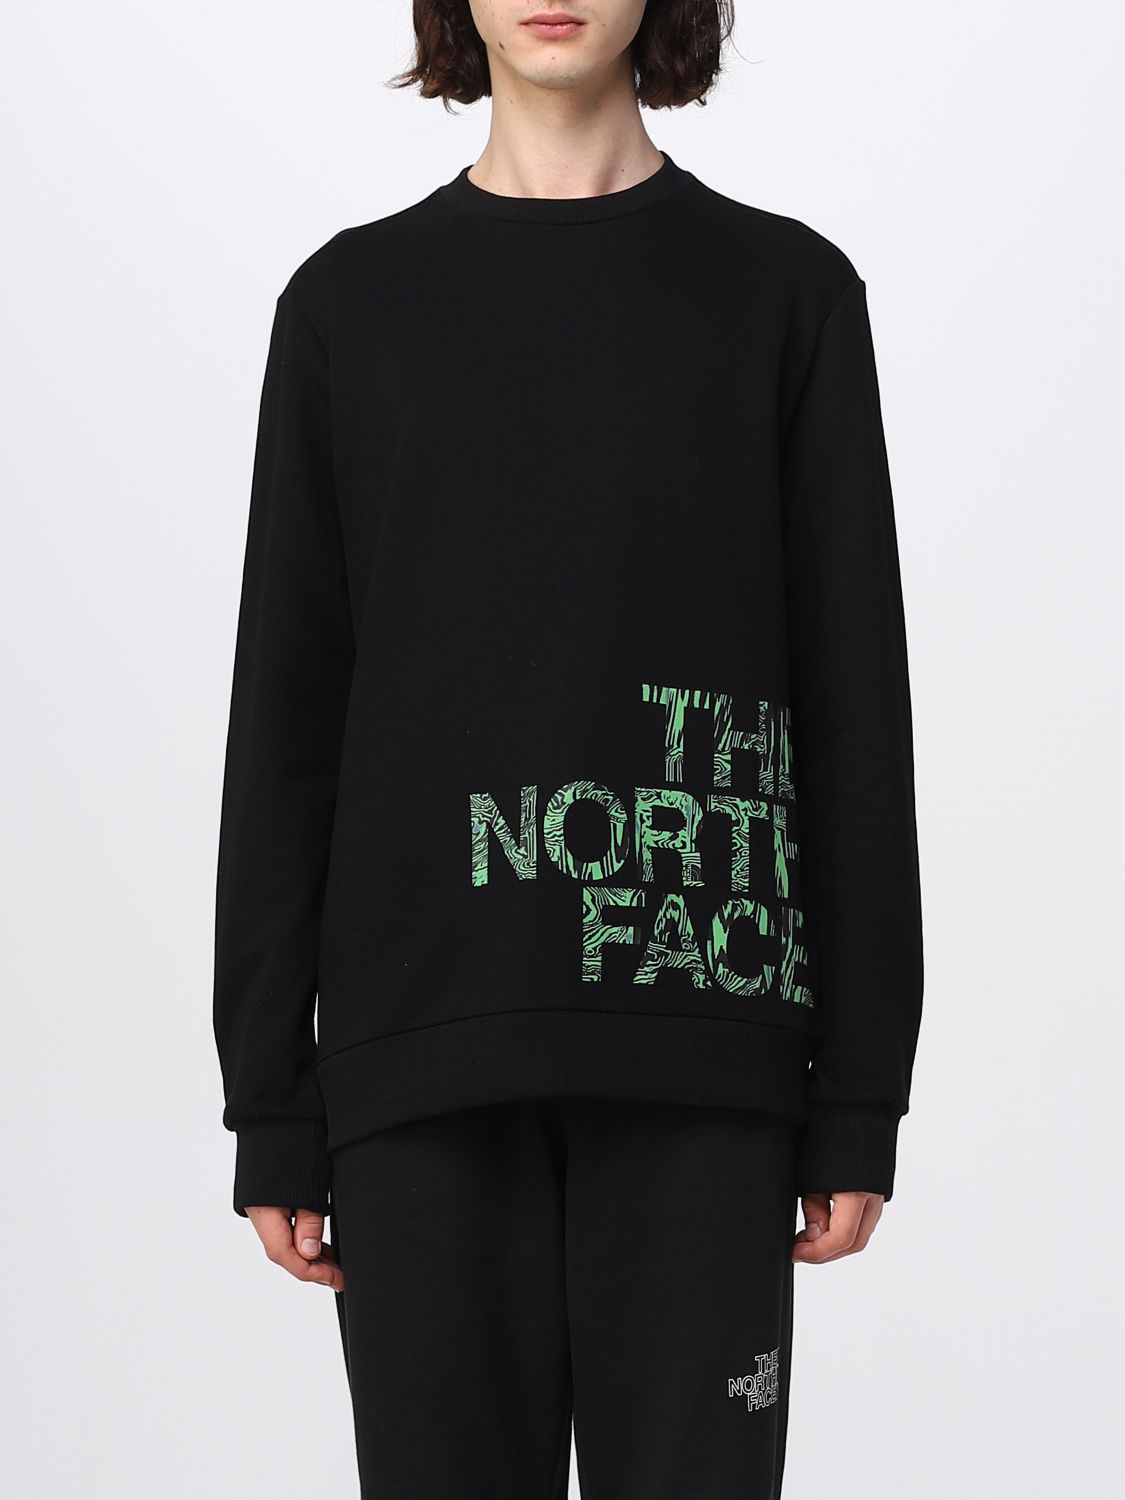 THE NORTH FACE: sweatshirt for men - Black | The North Face sweatshirt ...